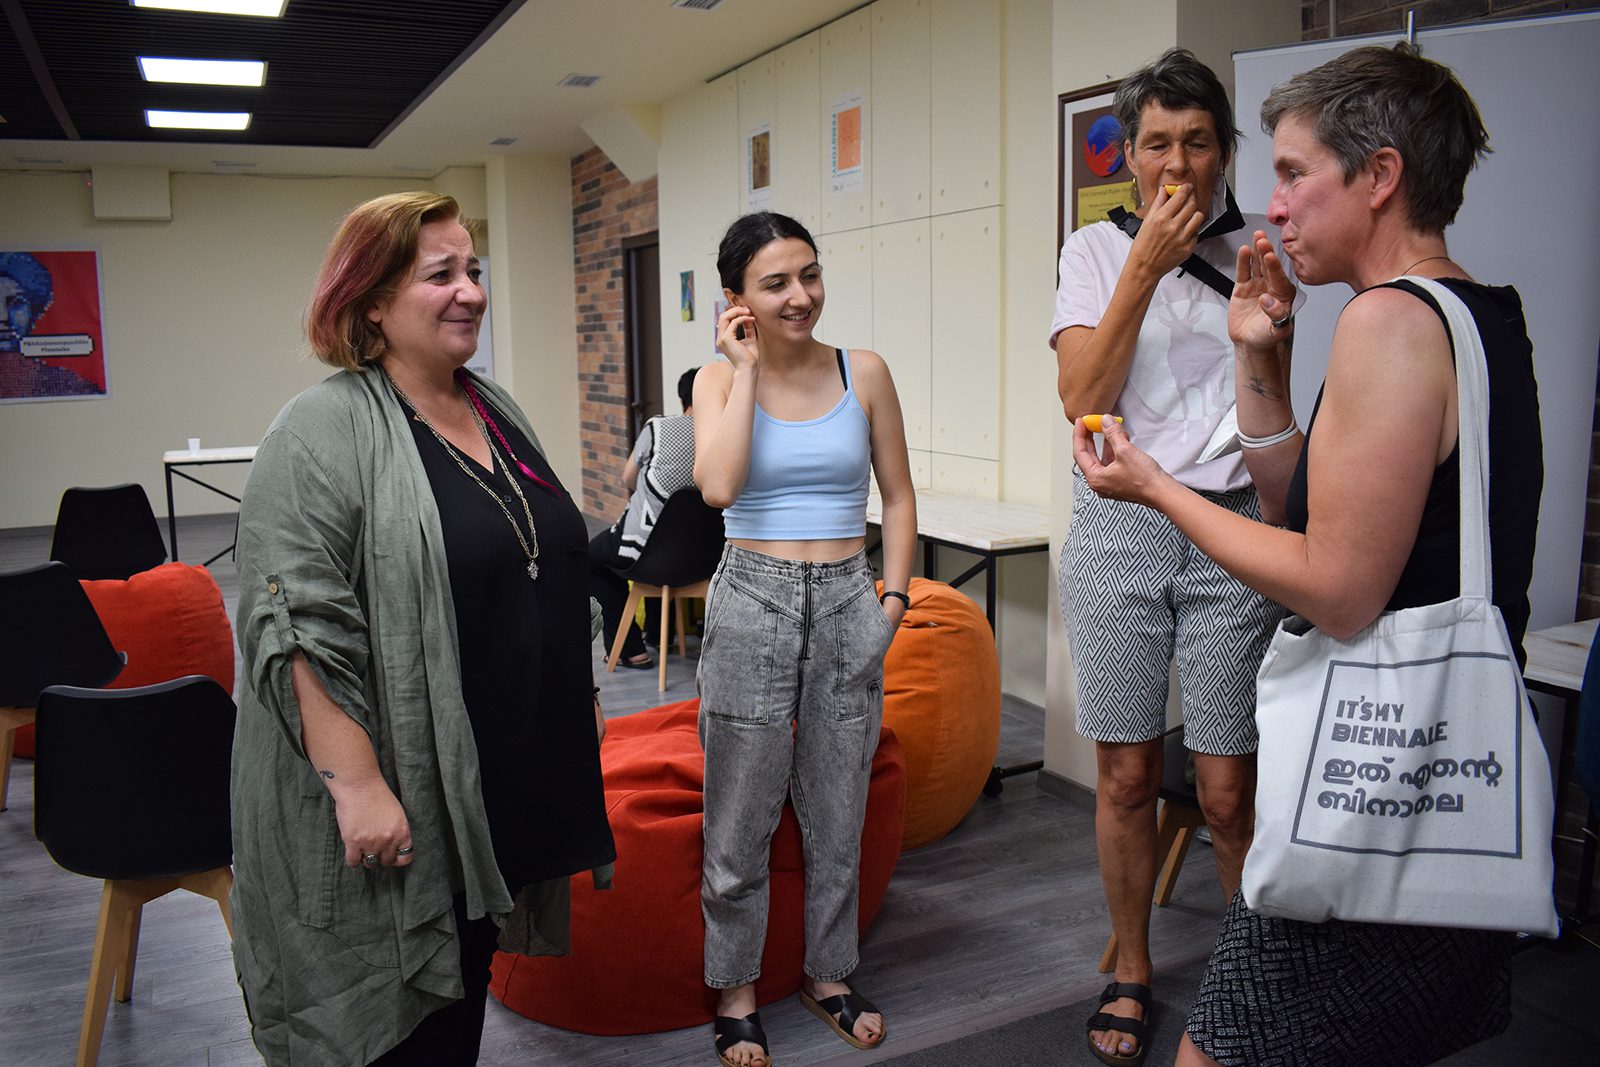 Lara Aharonian, left, meets with other activists at the Women’s Resource Center in Yerevan, Armenia, on June 30, 2022. Photo by Priyadarshini Sen